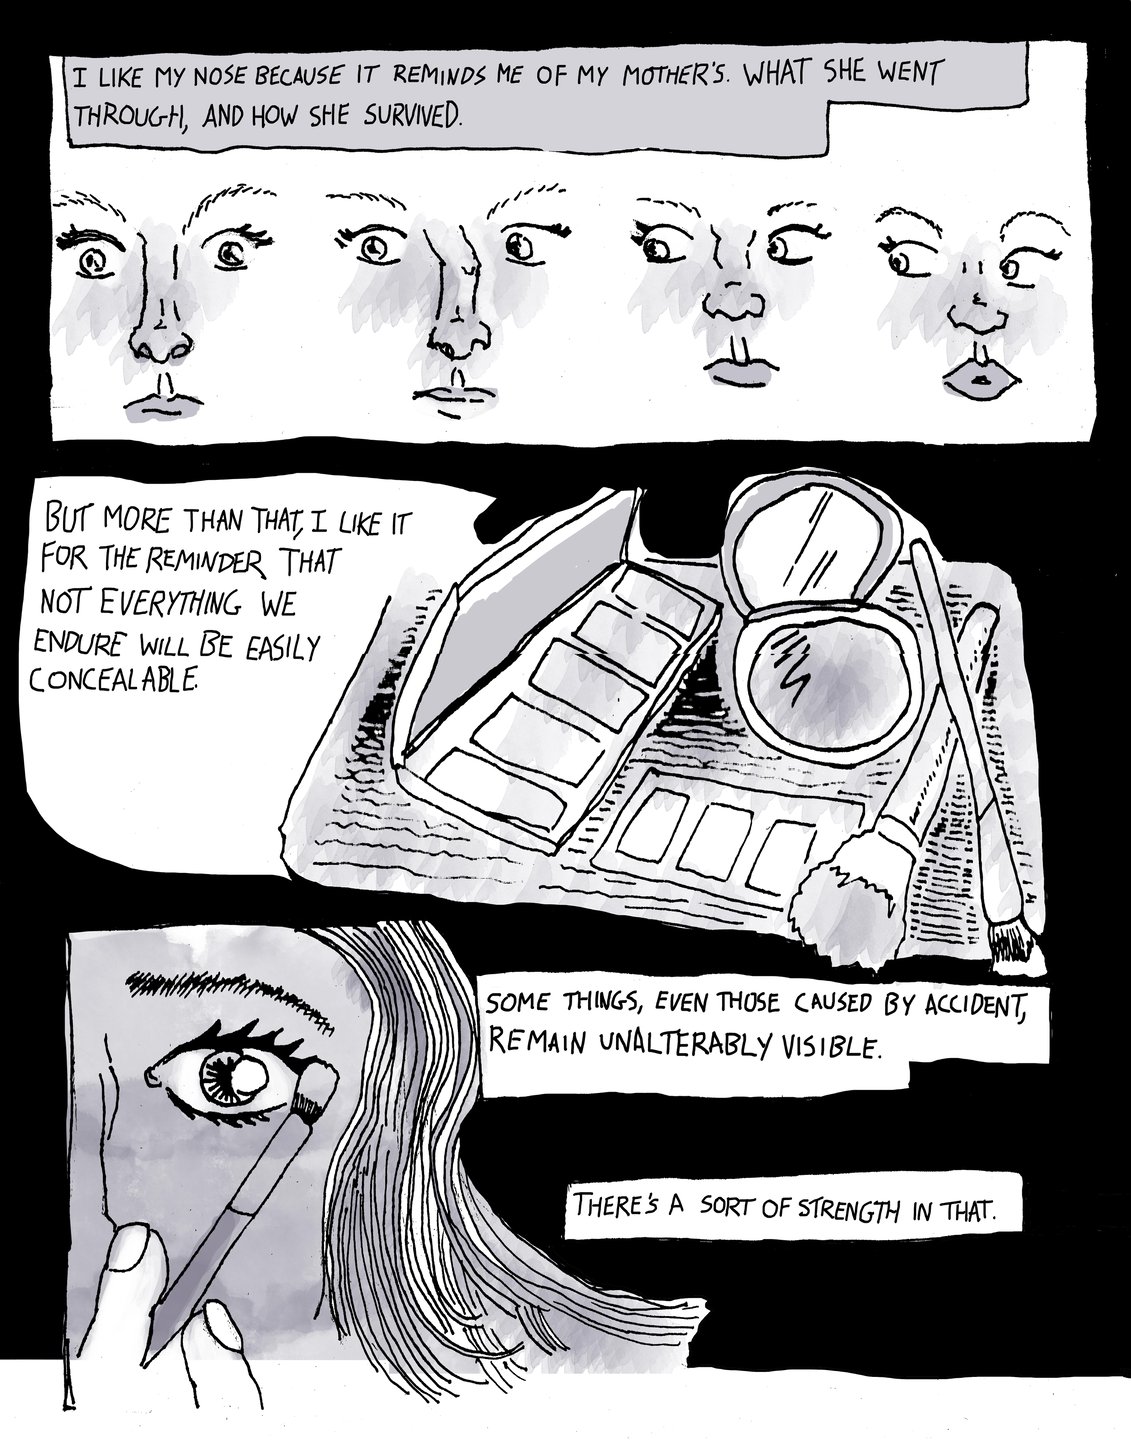 Page 5, panel one: against a black background is a drawing of four faces with different noses, two of the noses are crooked. The text reads, “I like my nose because it reminds me of my mothers. What she went through, and how she survived.” Panel two: a drawing of make up brushes eyeshadow and a mirror. The text reads, “but more than that, I like it for the reminder that not everything we endure will be easily concealeble.” Panel three: a drawing close-up of an eye while having make up put on it. The text reads, “some things, even those caused by accident, remain unalterably visible. There’s a sort of strength in that.”